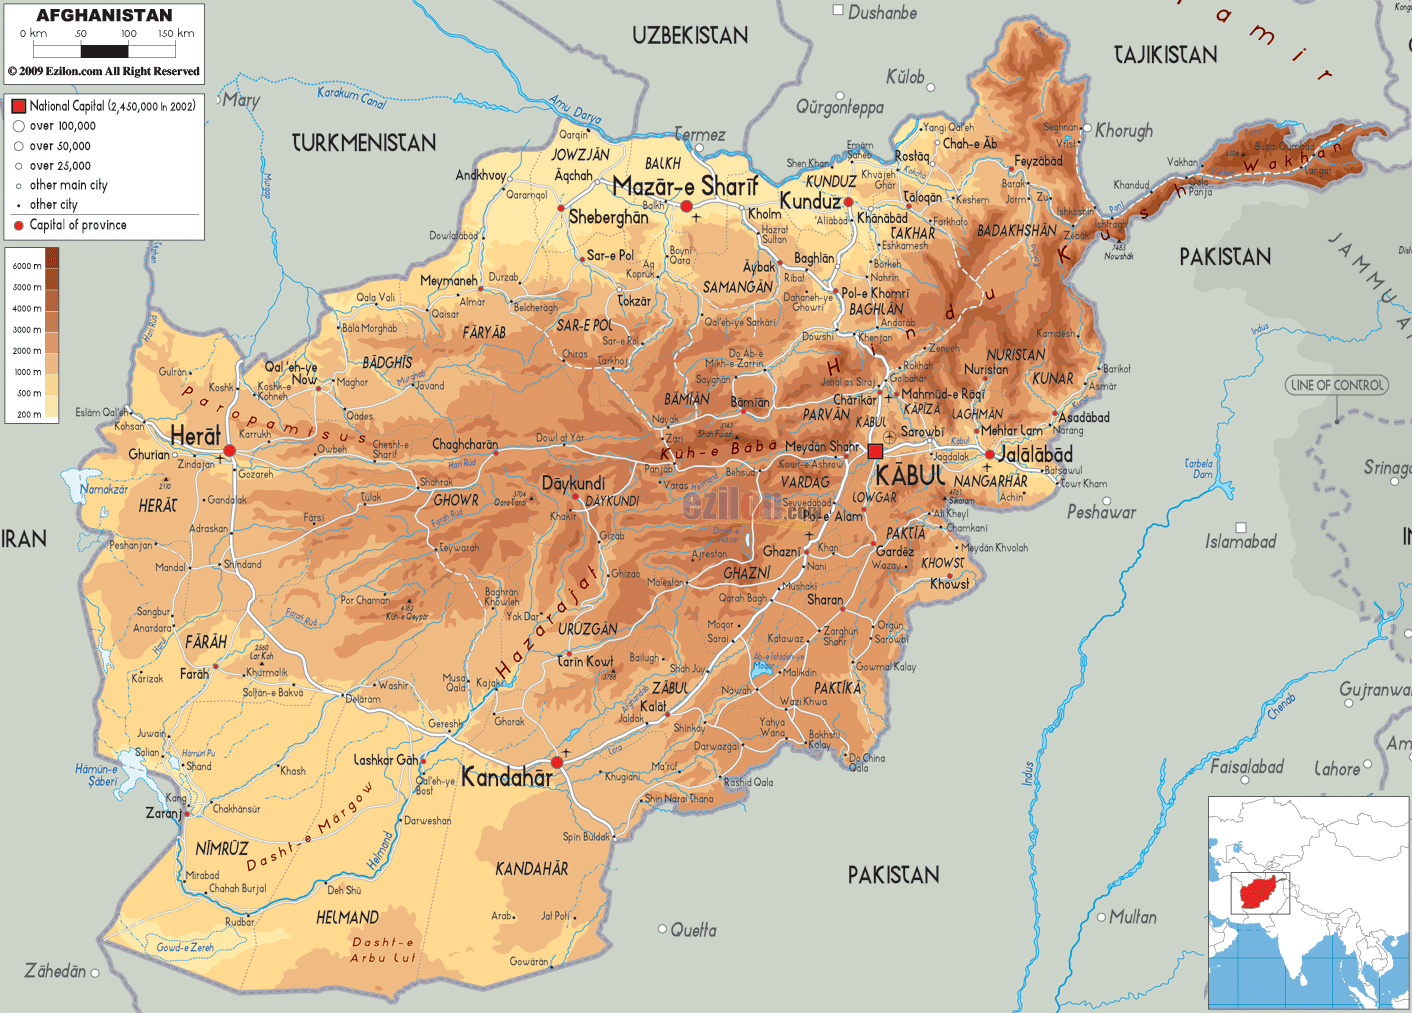 http://www.ezilon.com/maps/images/asia/Afghanistan-physical-map.gif